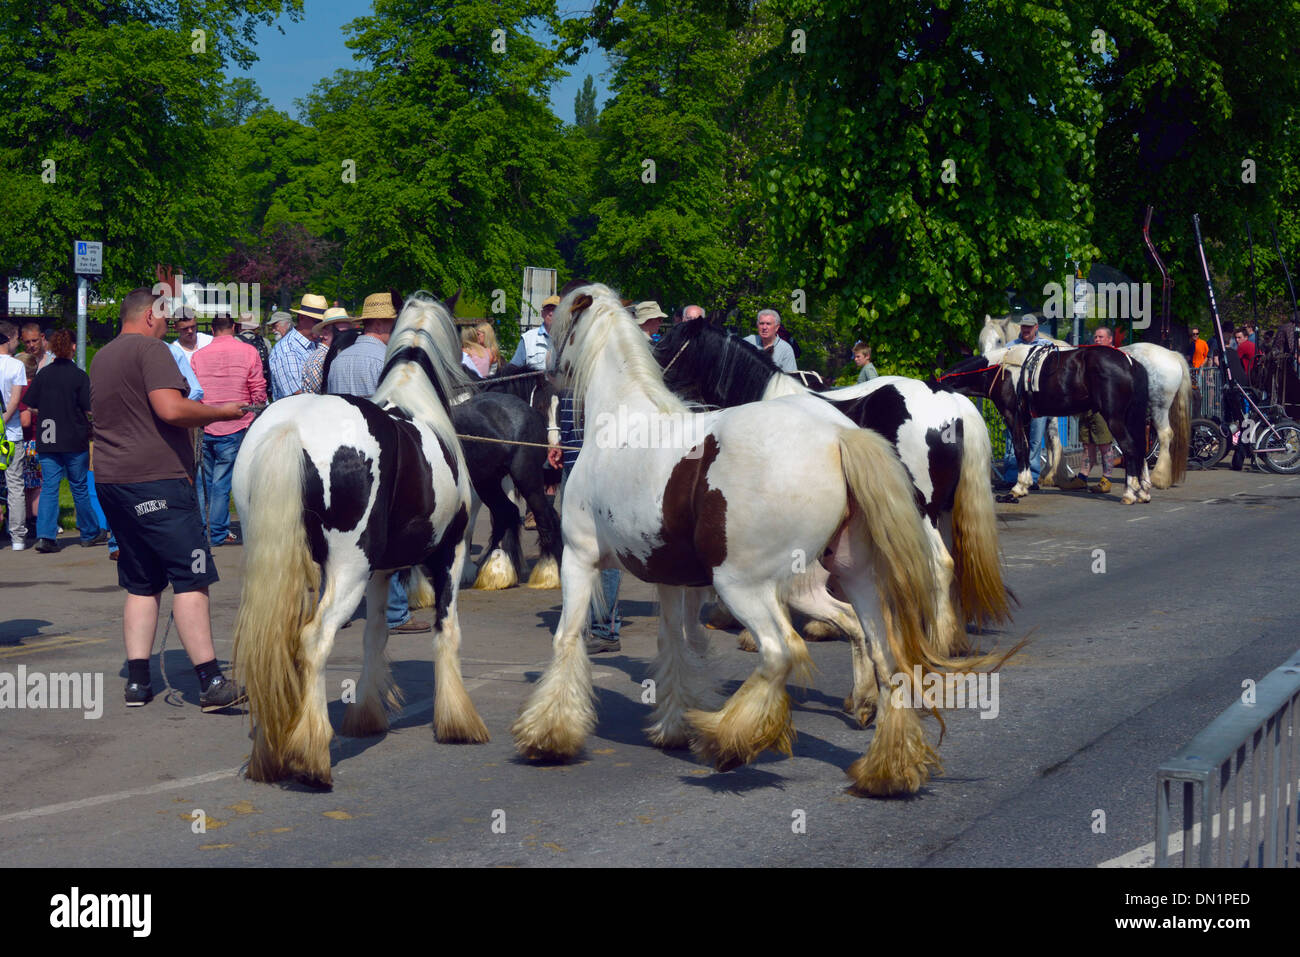 Gypsy travellers with horses. Appleby Horse Fair, June 2013. Appleby-in-Westmorland, Cumbria, England, United Kingdom, Europe. Stock Photo